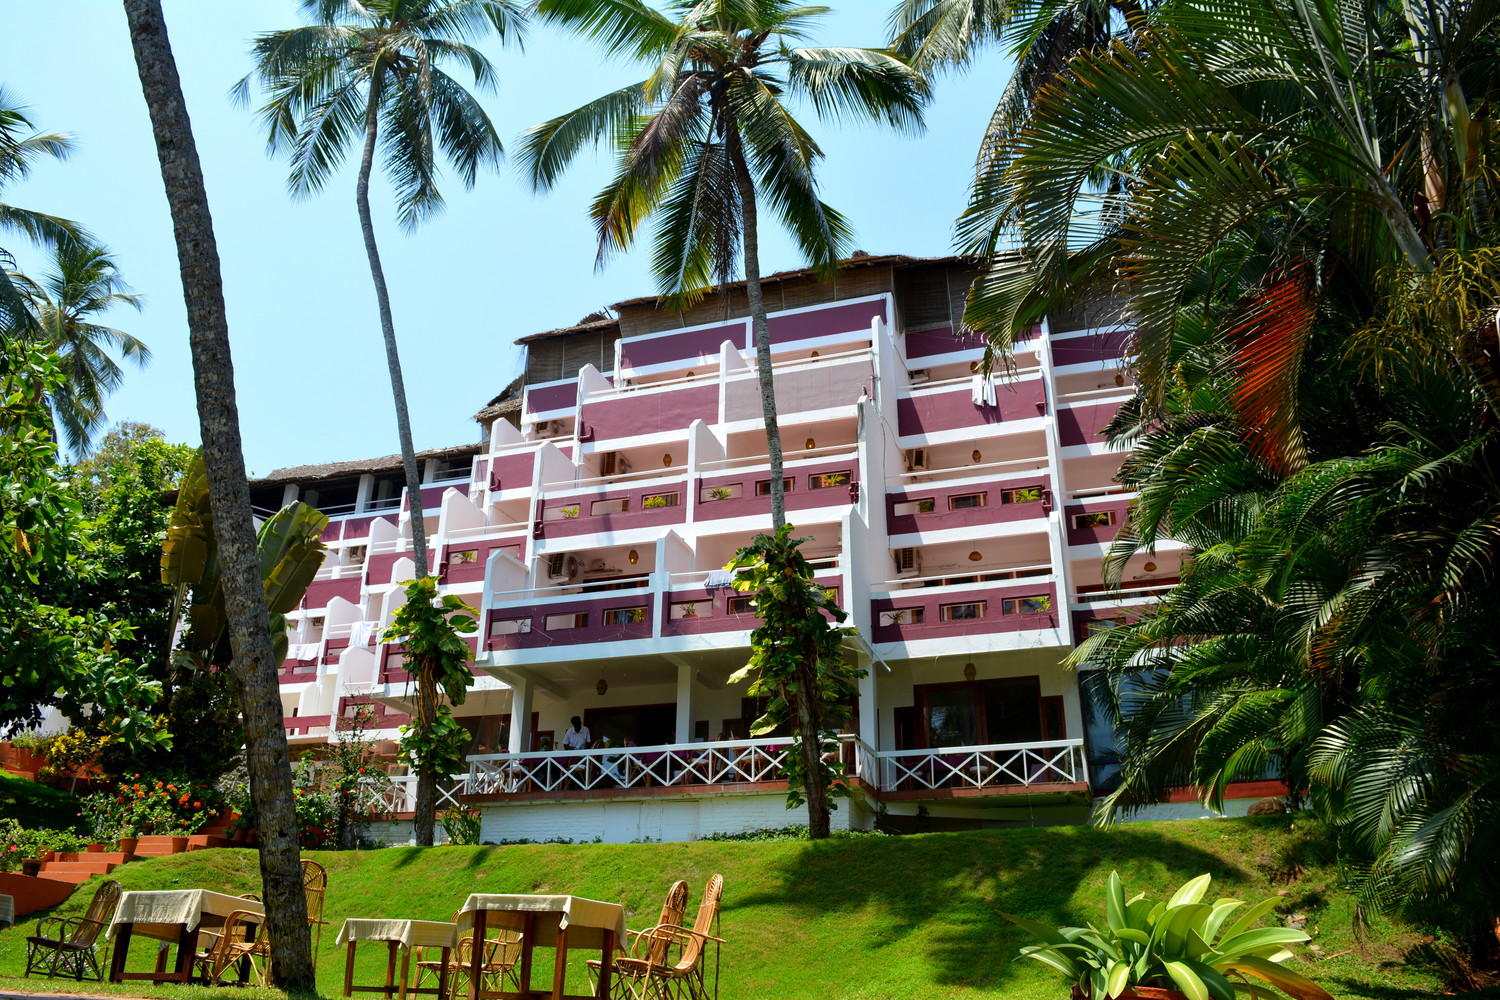 A multistorey hotel building atop a small hill covered with green lawn maintained by the hotel